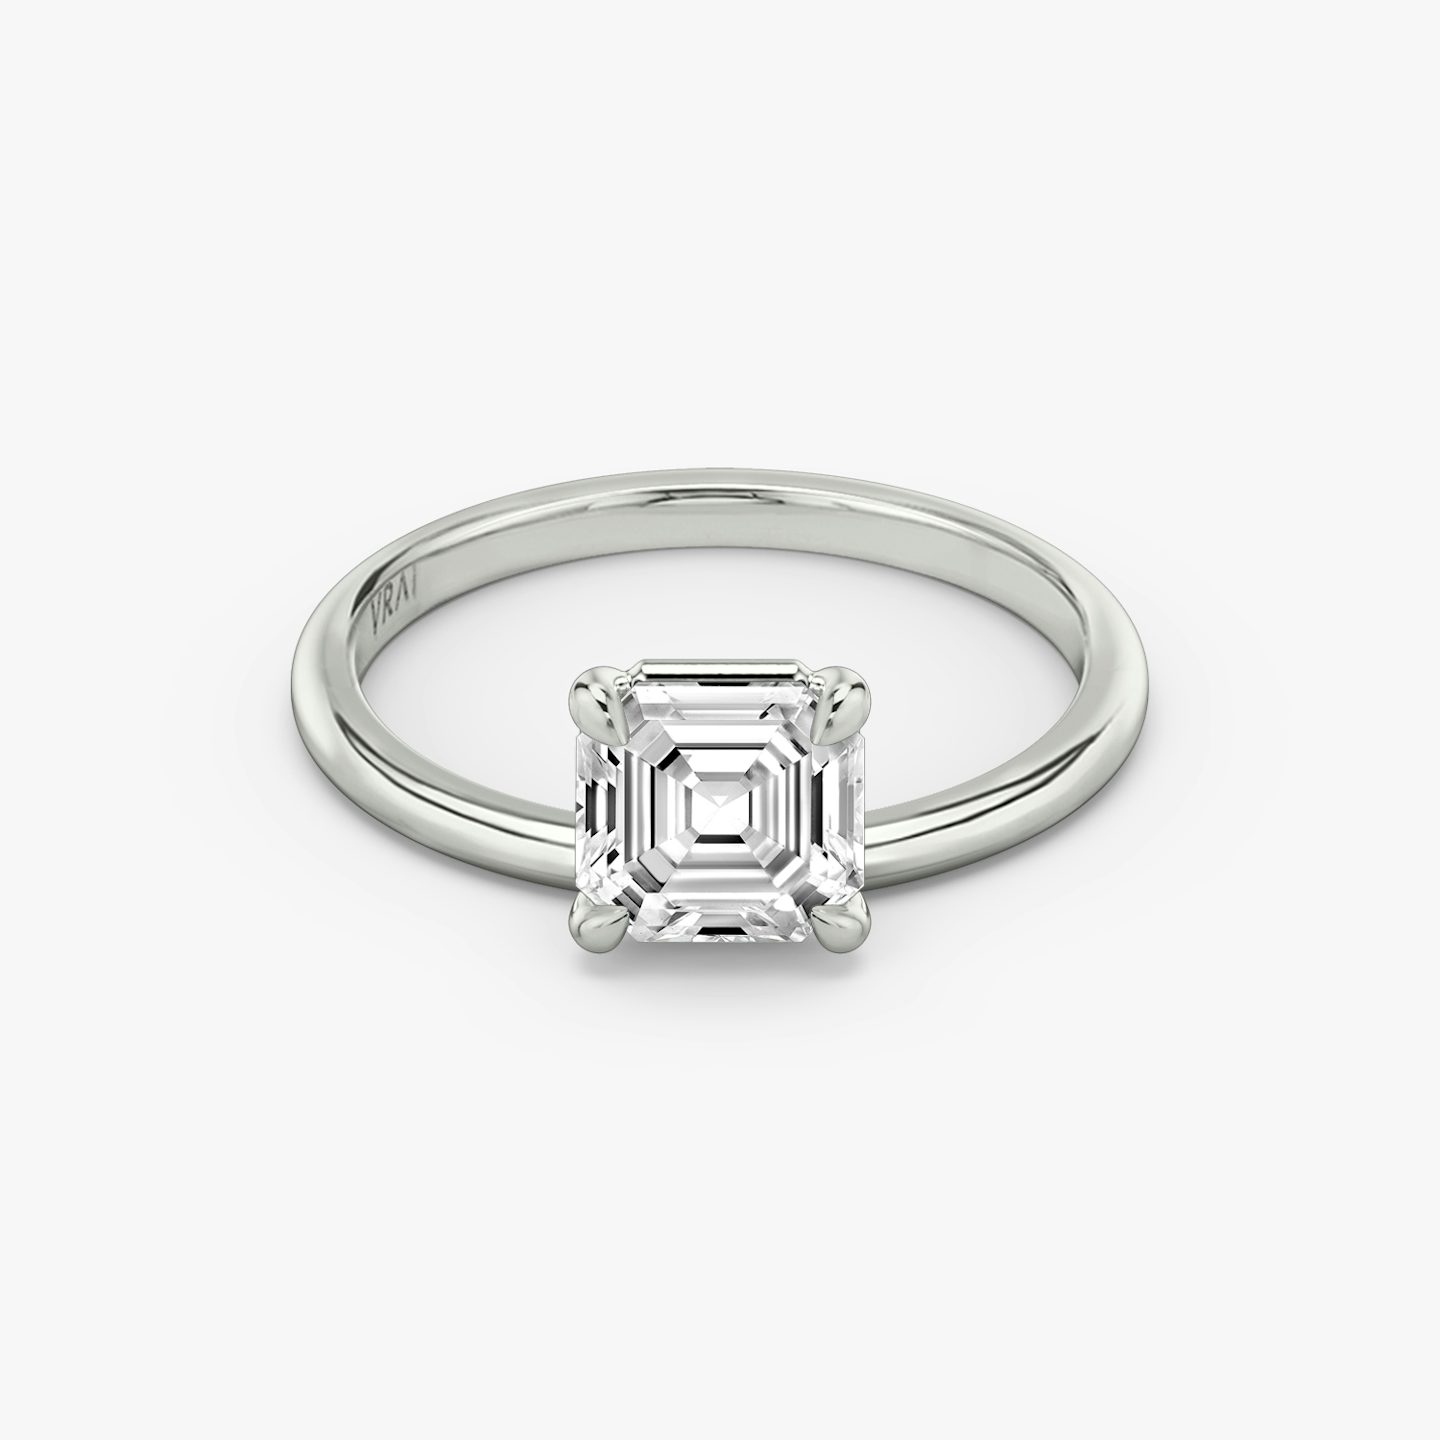 White gold Hover engagement ring with Asscher cut diamond